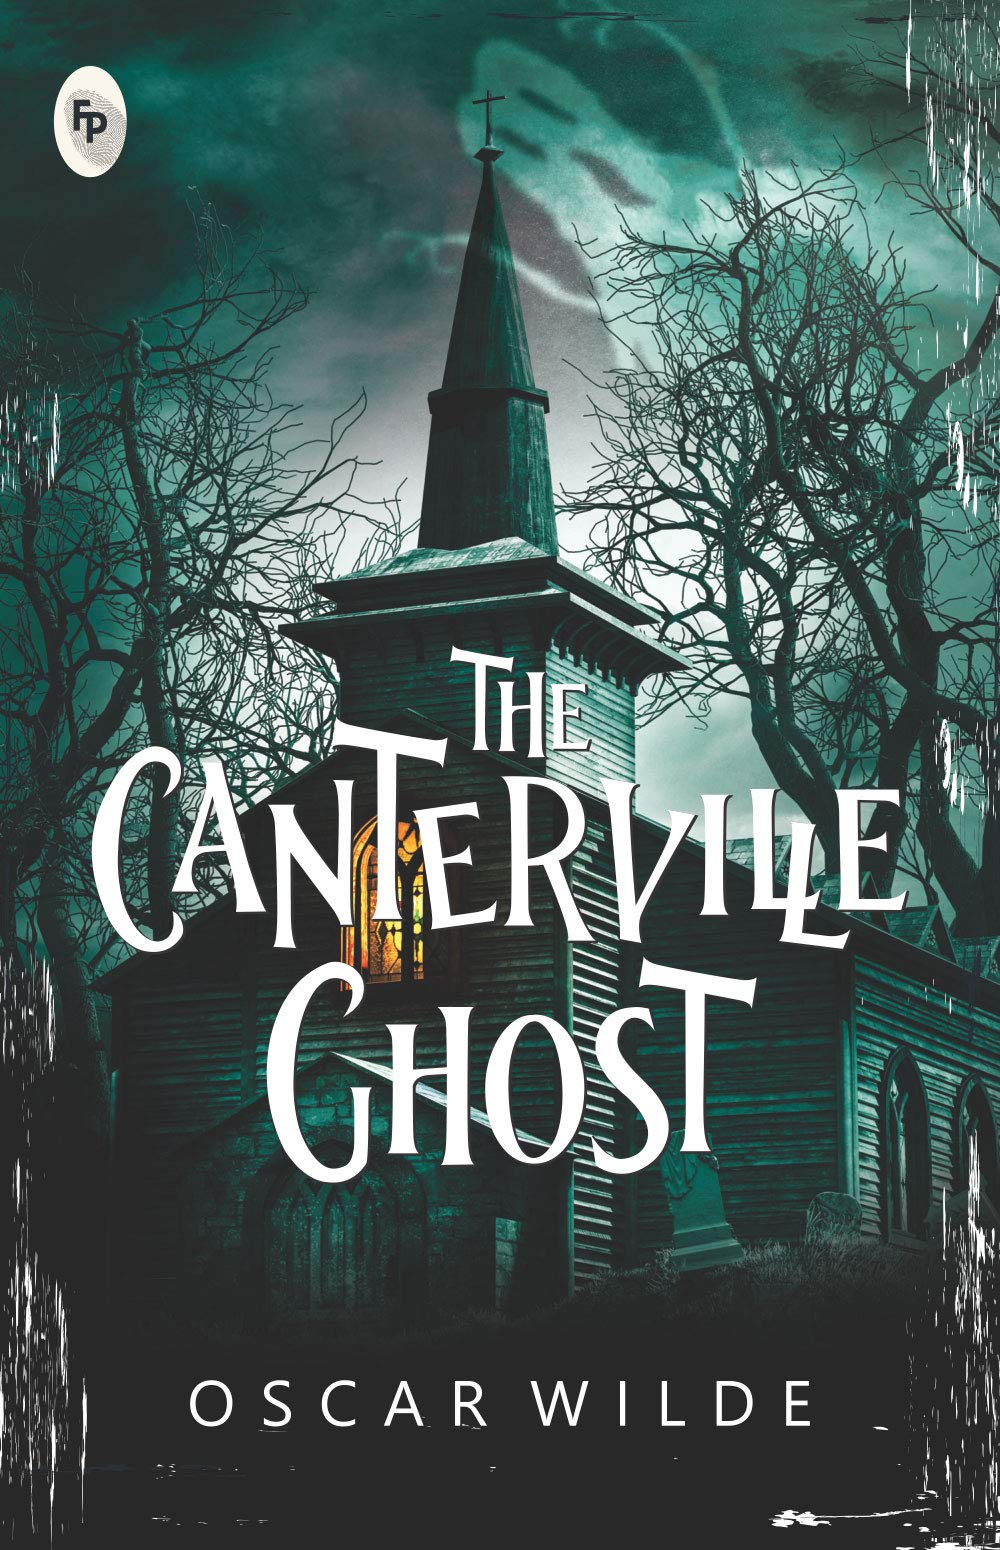 IMG : The Canterville Ghost